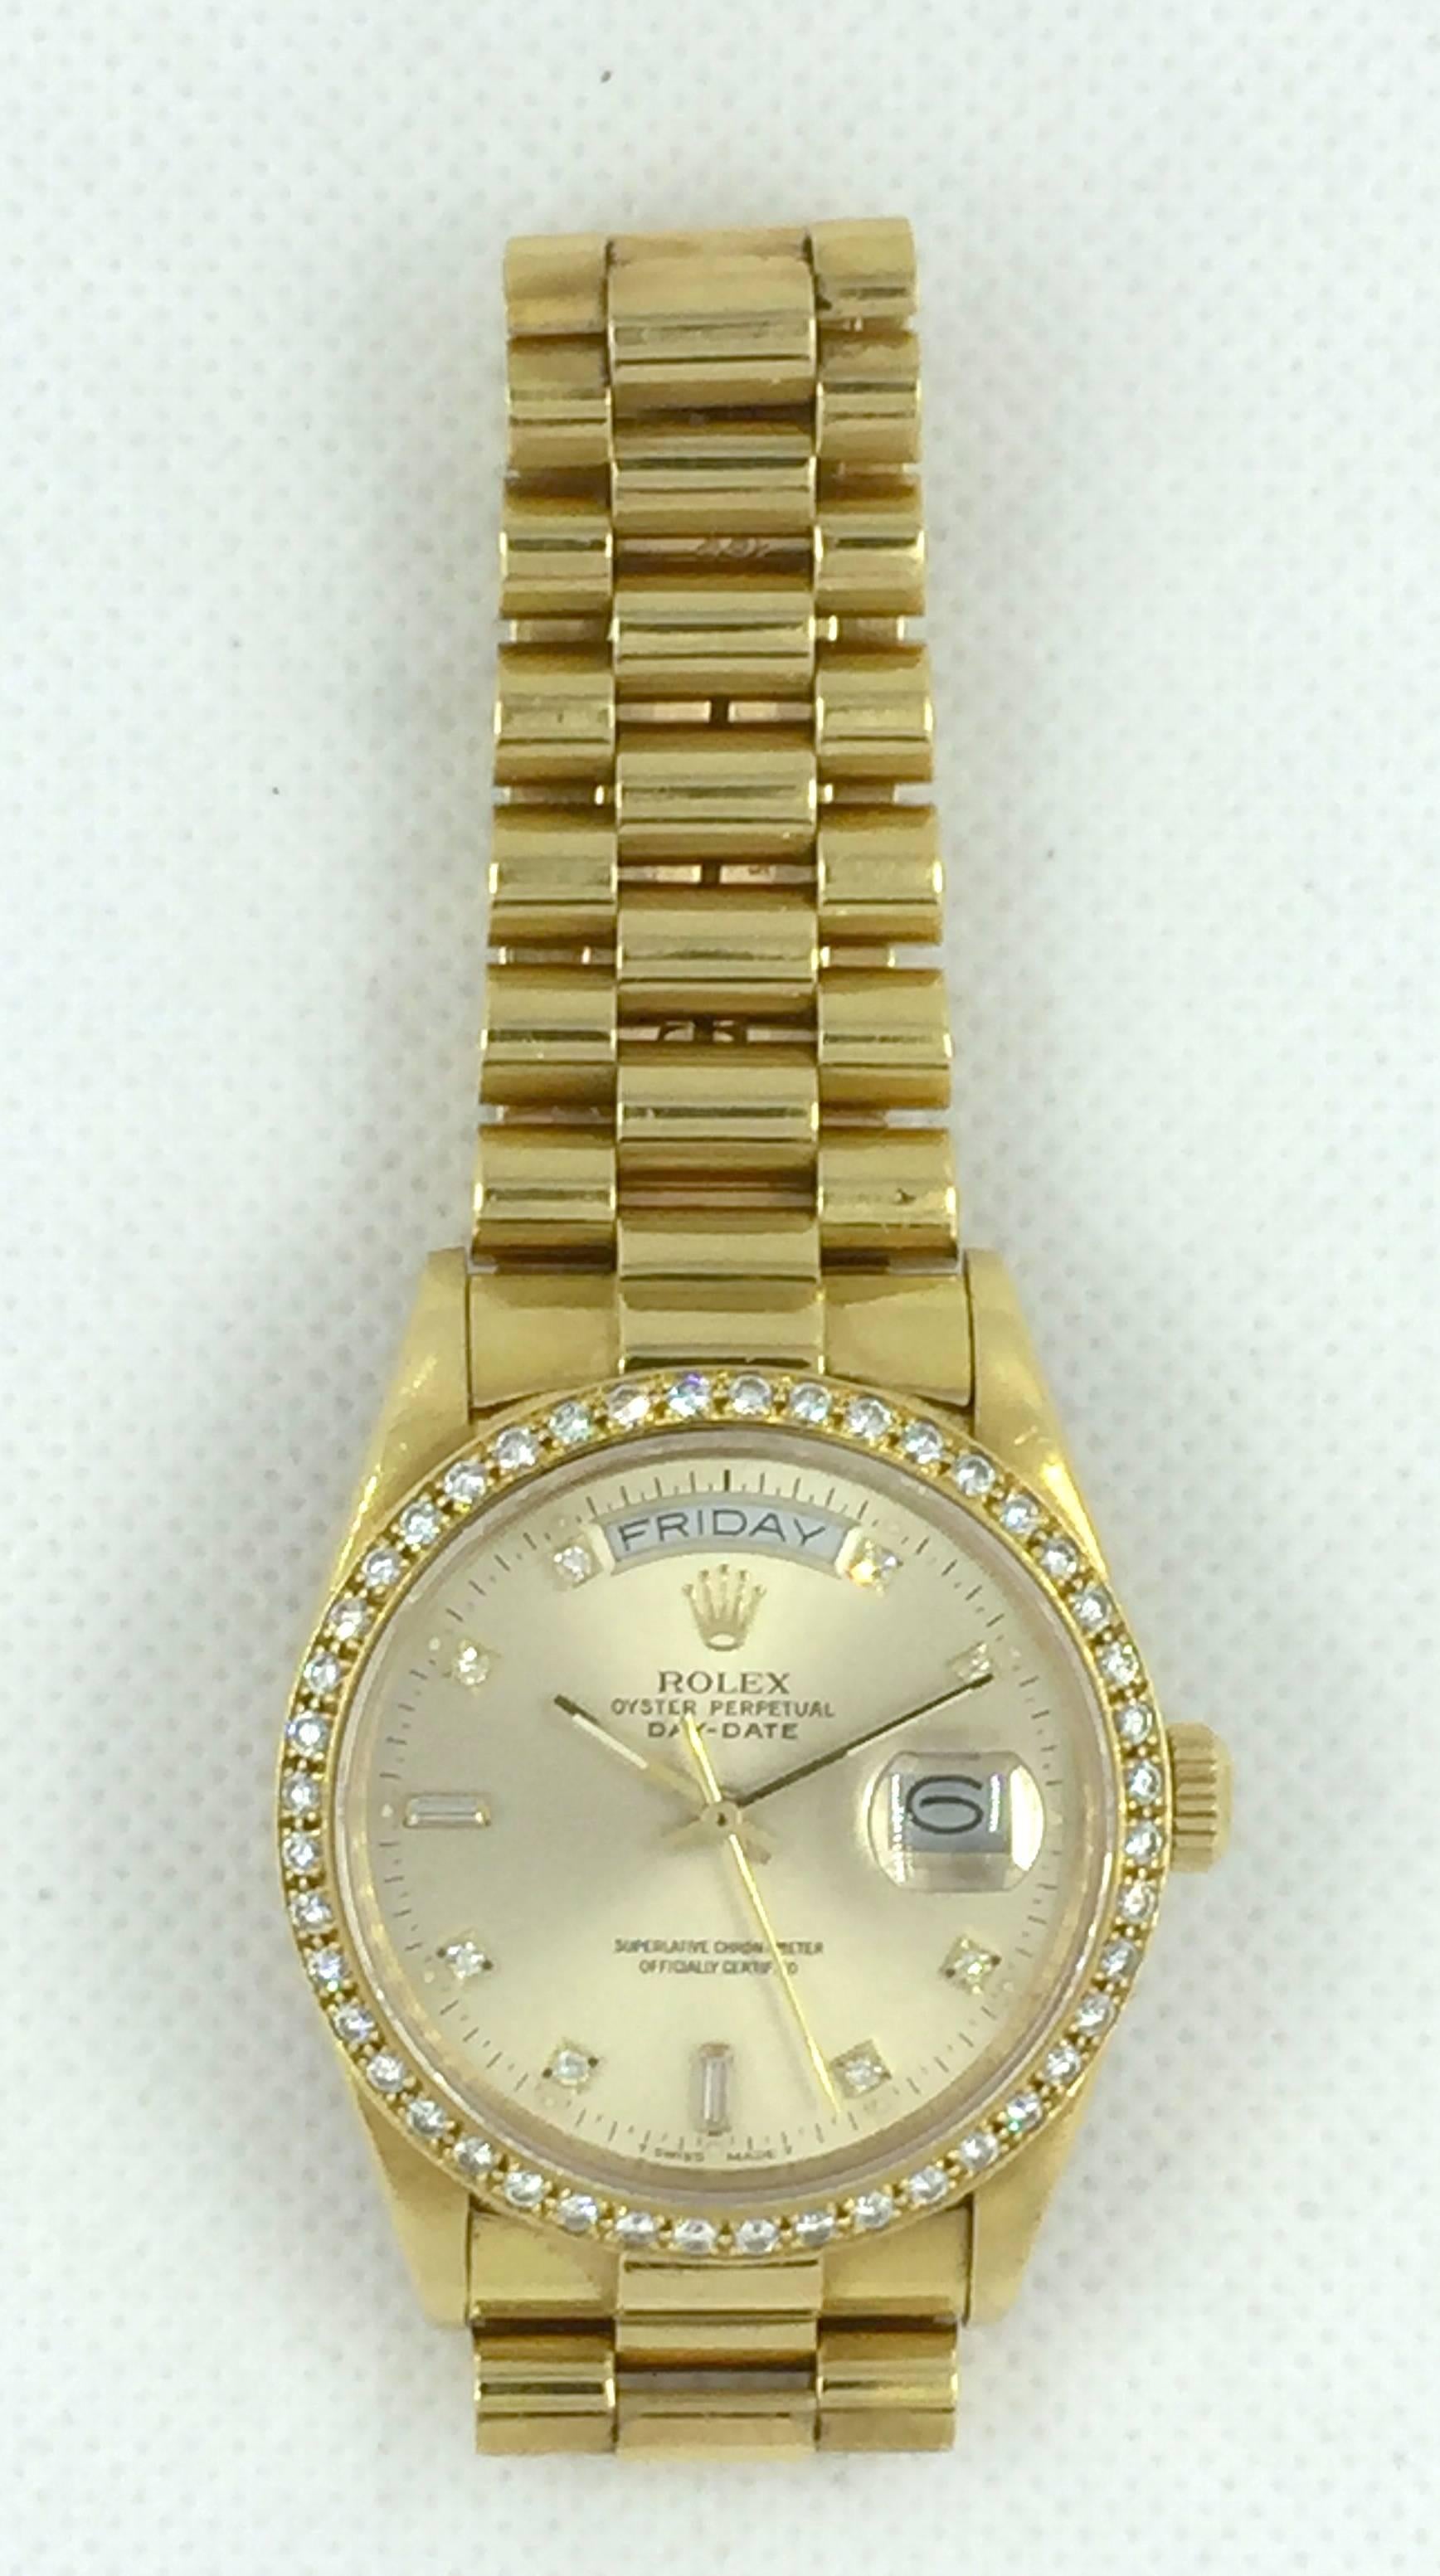 Rolex 18K Yellow Gold Oyster Perpetual Day-Date Wristwatch
Factory Champagne Diamond Dial
Factory 18K Yellow Gold and Diamond Bezel
36mm in size 
Reference 18048 Which is For A Factory Diamond Bezel
Rolex Calibre 3055 Automatic Quickset